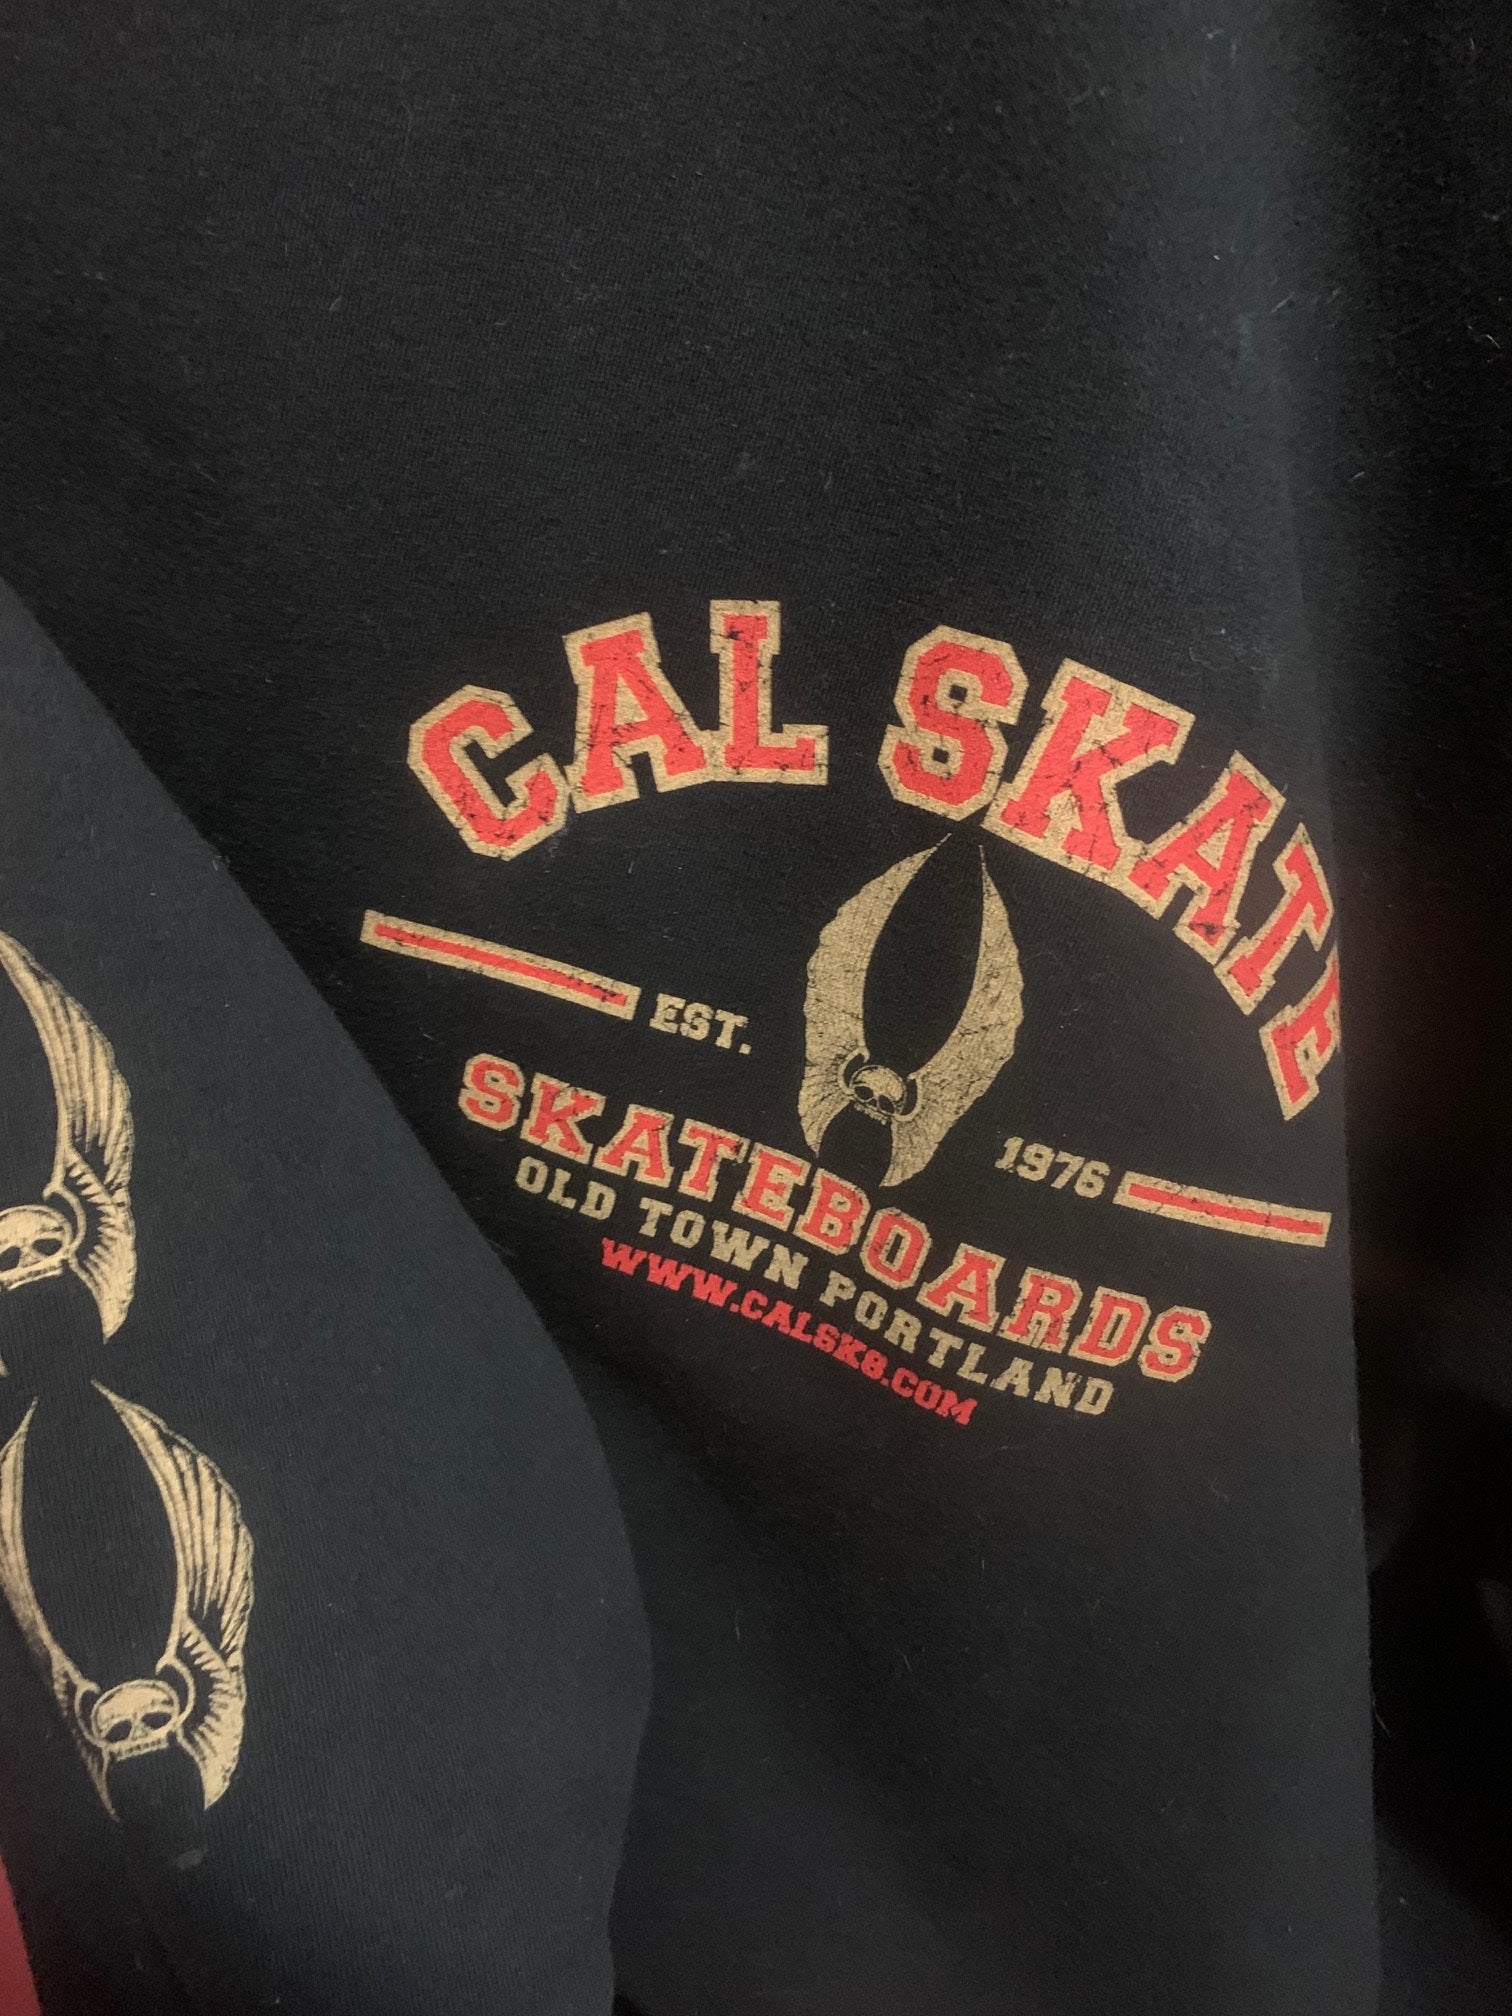 Cal Skate "College-Hoody" Black/ Red and Gold